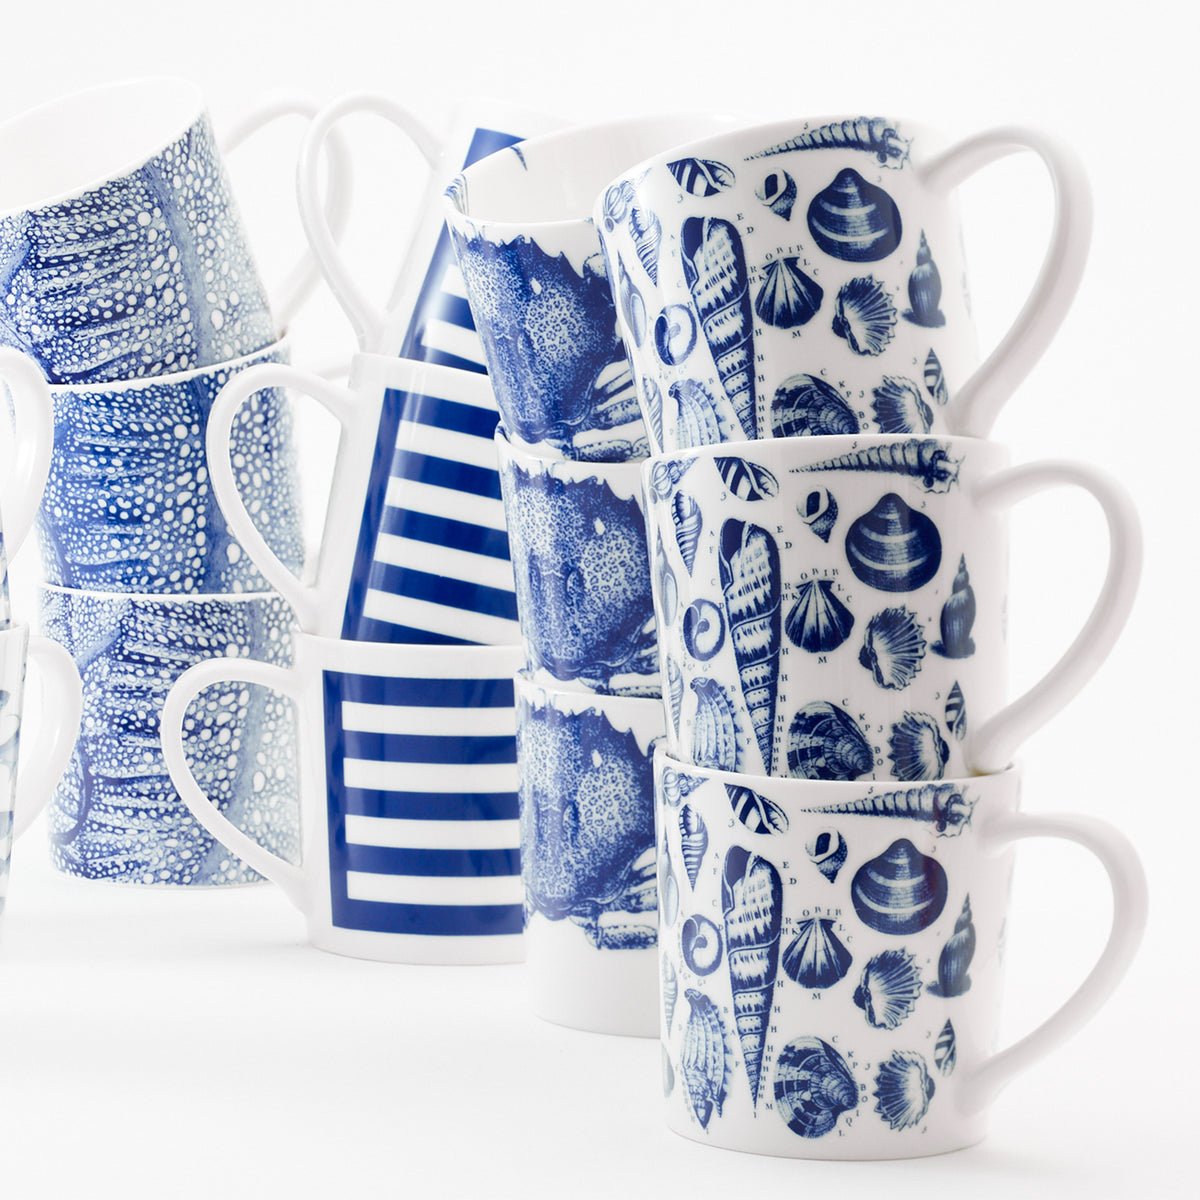 A collection of high-fired, beach-inspired Shells Mugs by Caskata Artisanal Home stacked vertically, featuring different patterns such as seashells, stripes, and abstract designs. These blue and white porcelain mugs are also dishwasher safe for easy cleaning.